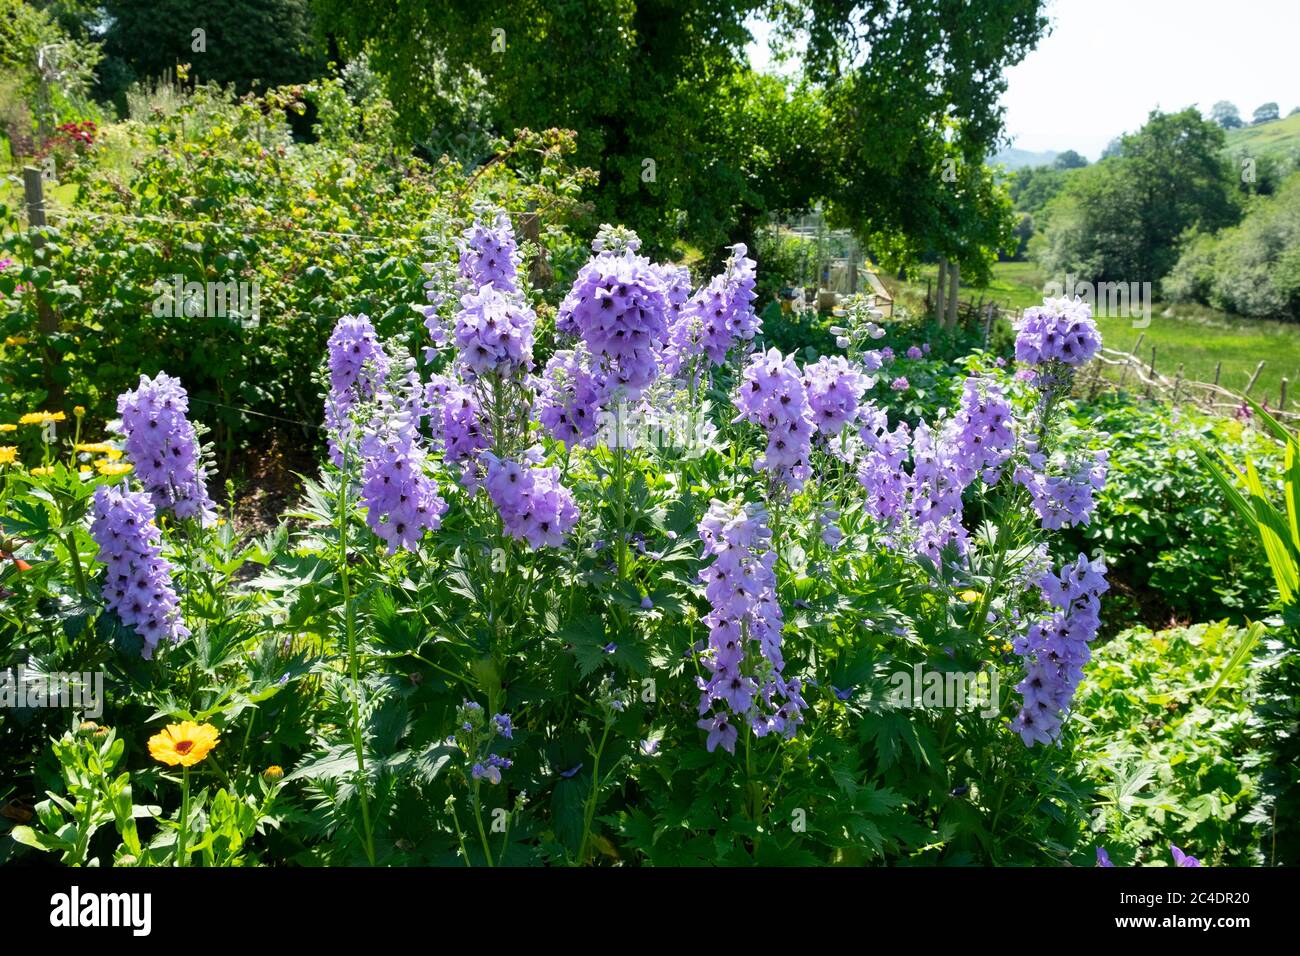 Blue delphiniums in bloom in herbaceous border in sunny summer country garden in June 2020 countryside Carmarthenshire Wales UK KATHY DEWITT Stock Photo